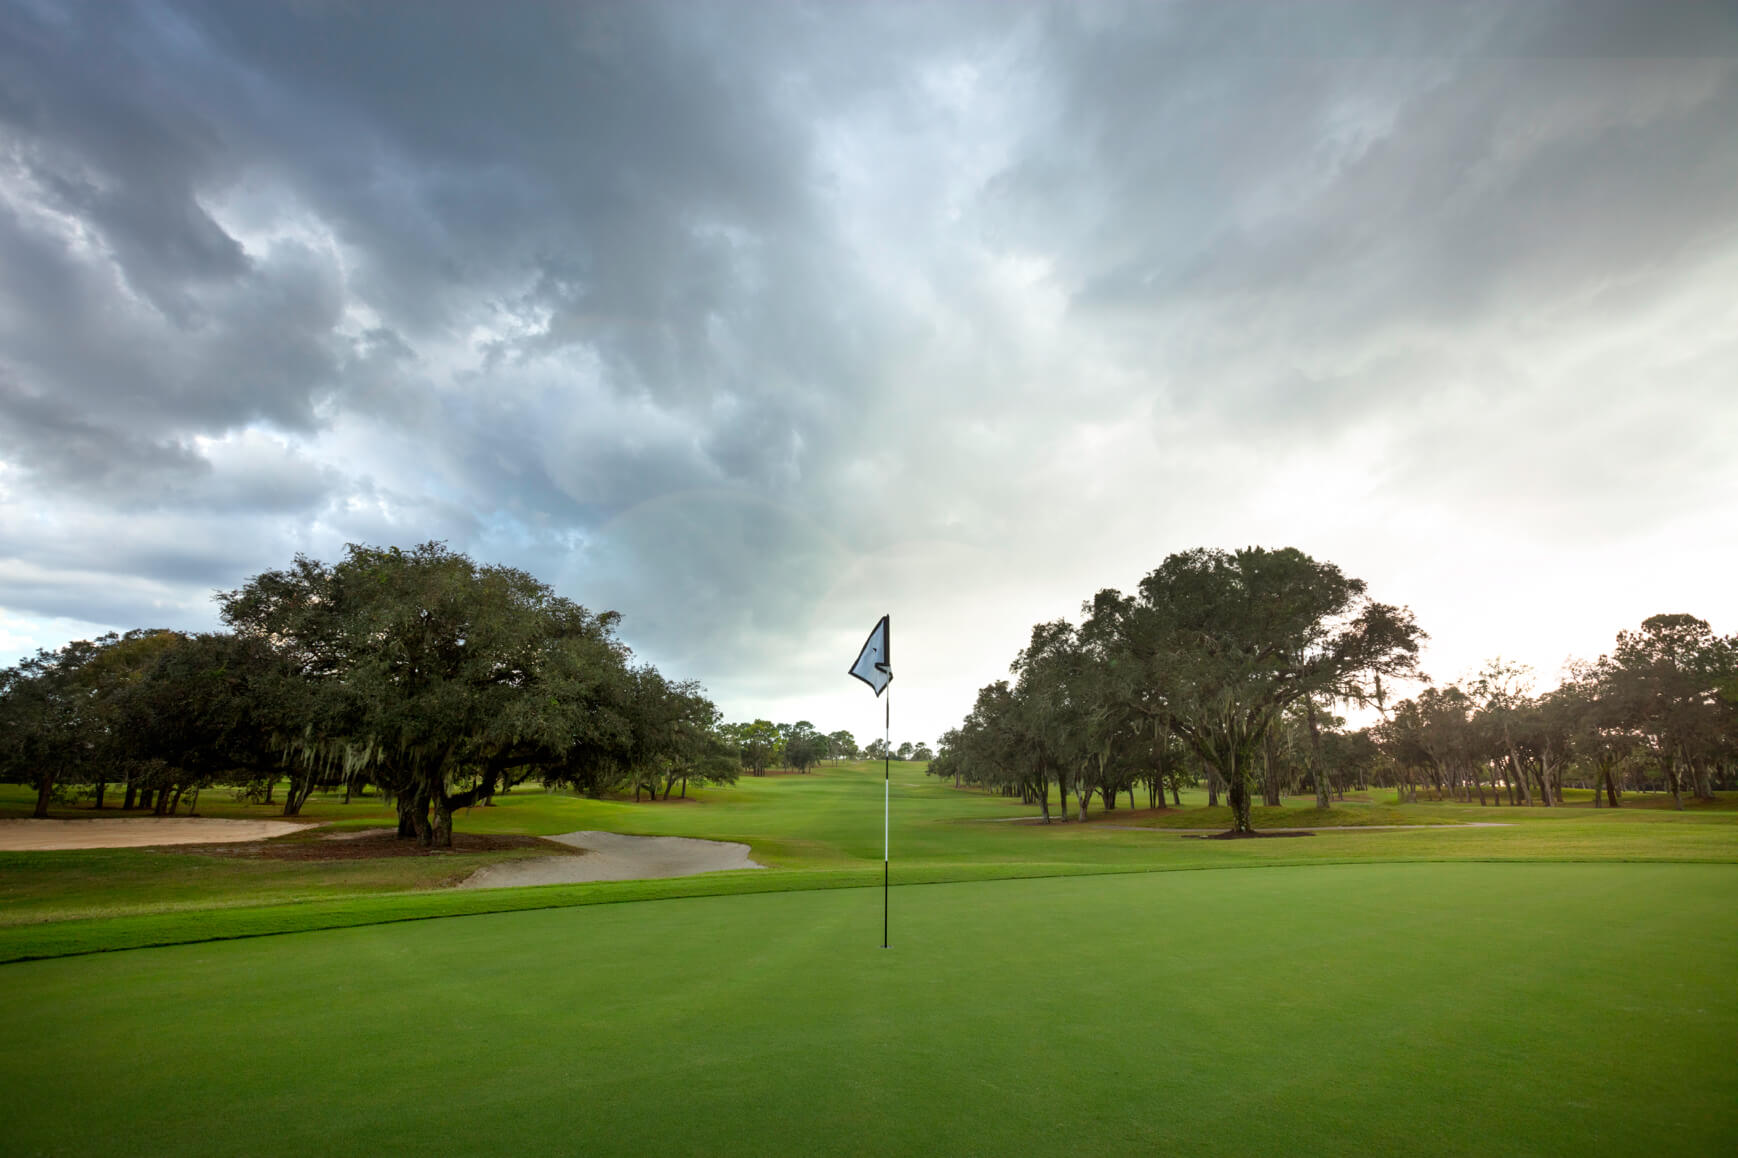 The Ranch Course is one of the best private golf courses in Ocala